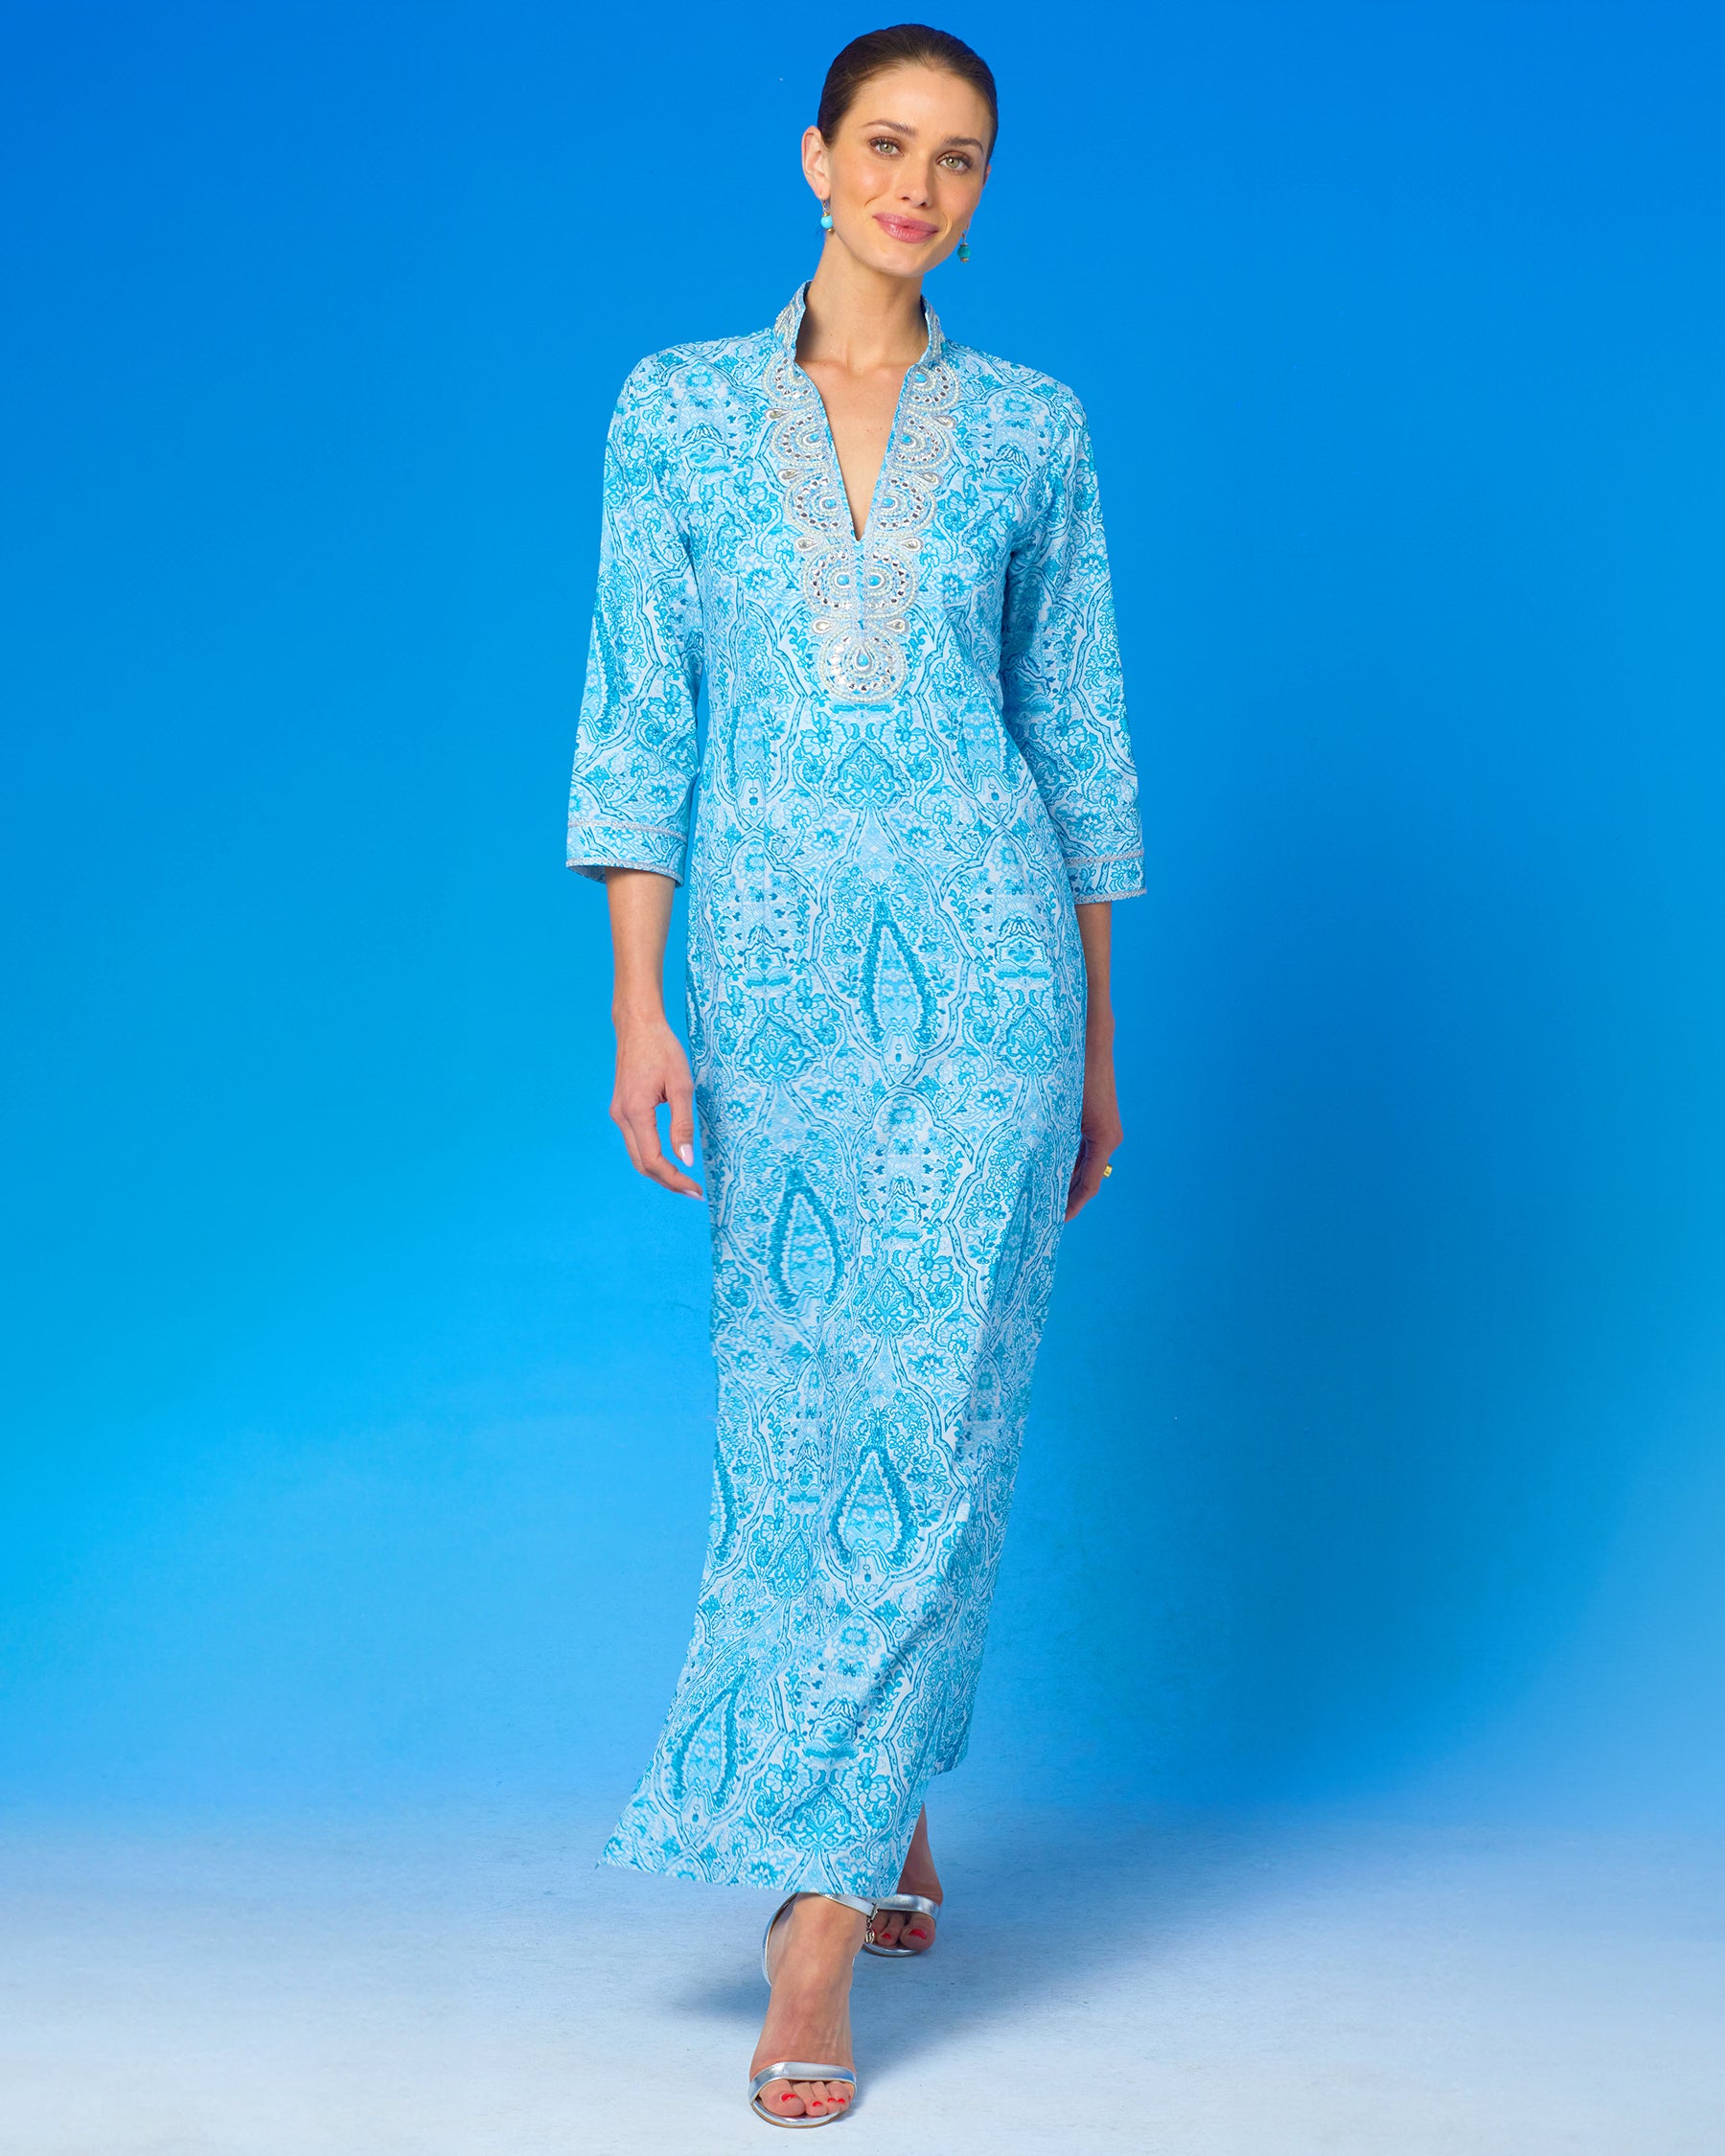 Noor Long Tunic Dress in Turquoise Paisley and Silver Embellishment-Front view walking